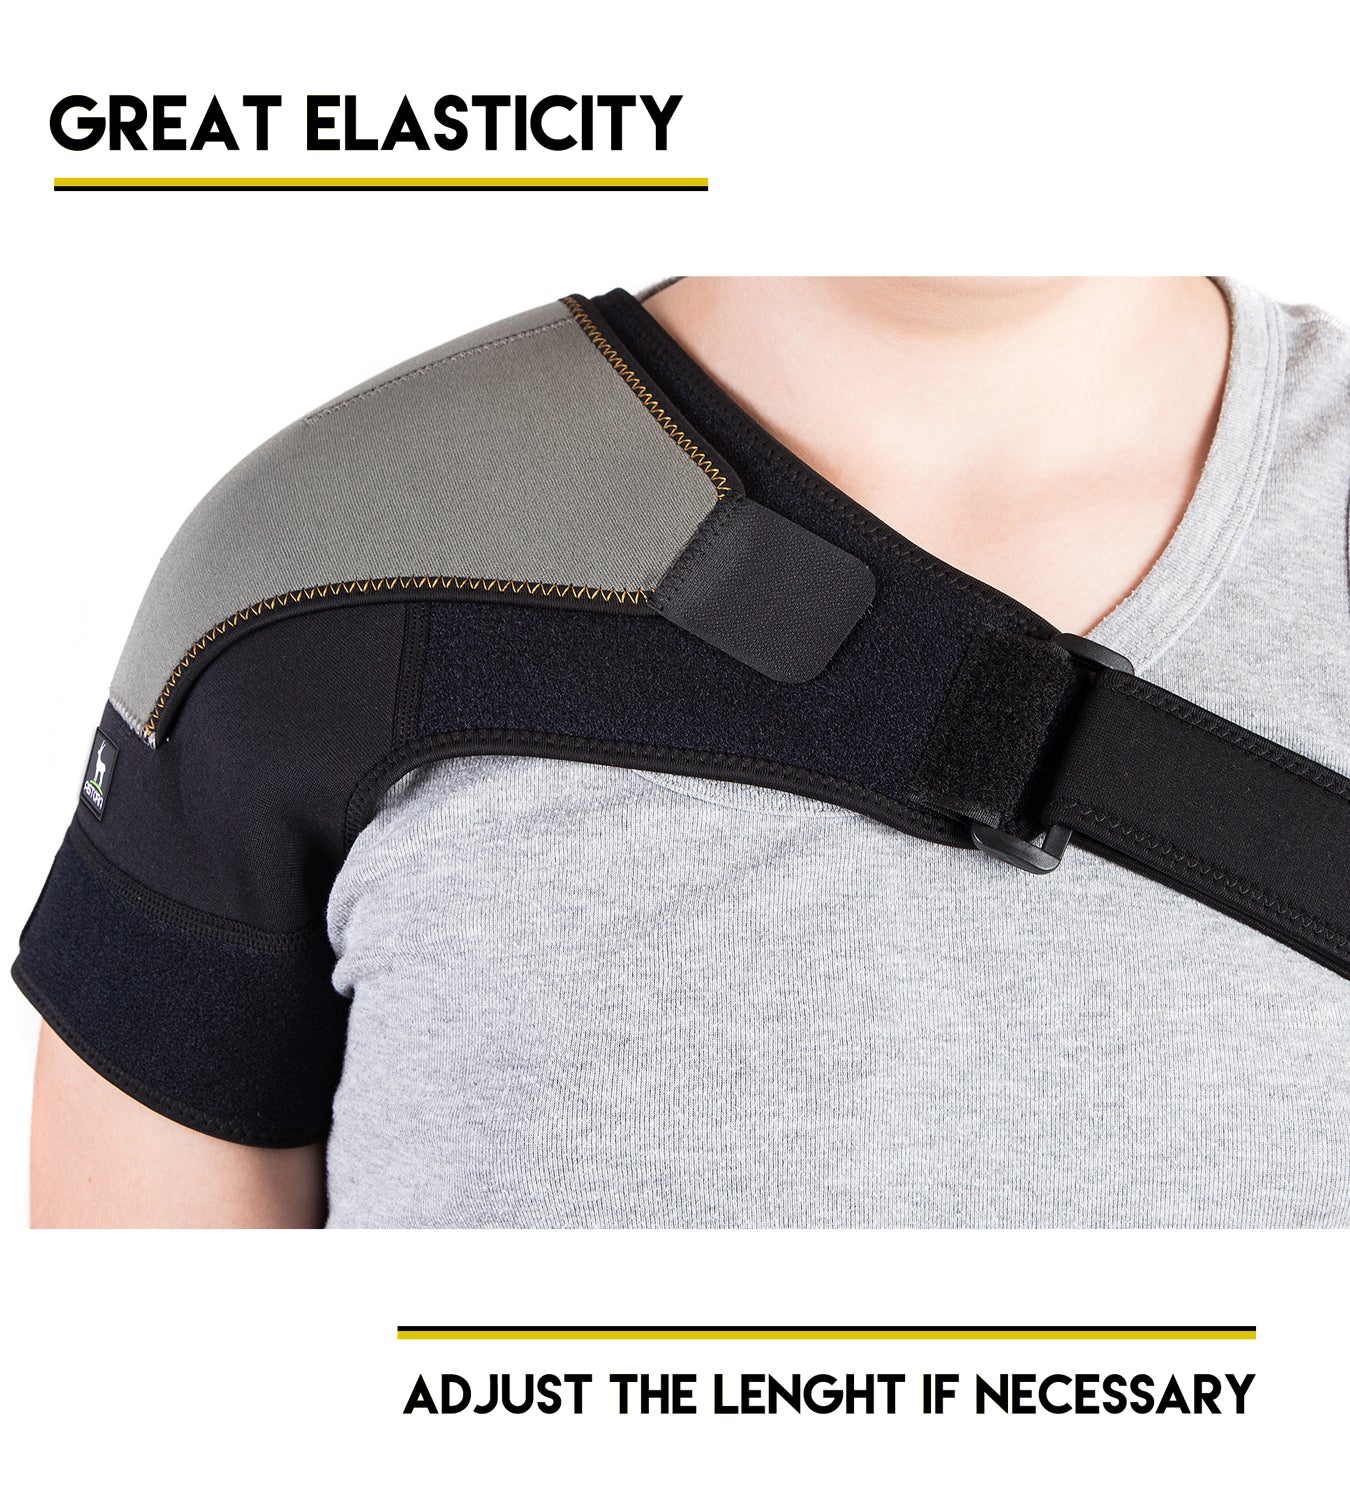 CopperJoint Shoulder Brace - Rotator Cuff Support Brace - One Size Fits All  - Shoulder Support for Men and Women - Adjustable Fit Sleeve Wrap for